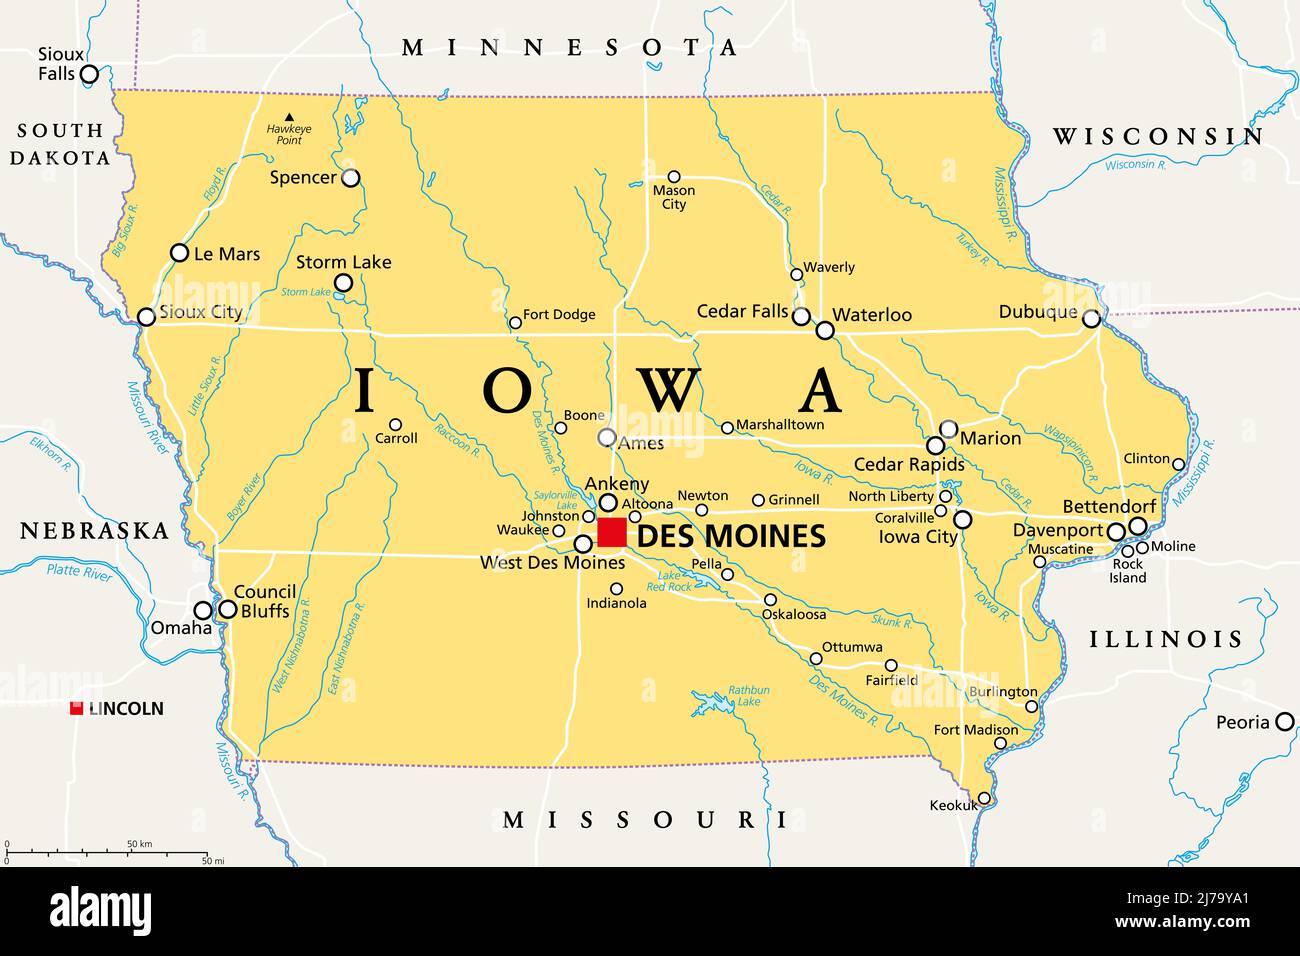 Iowa Ia Political Map With The Capital Des Moines And Most Important Cities Rivers And Lakes